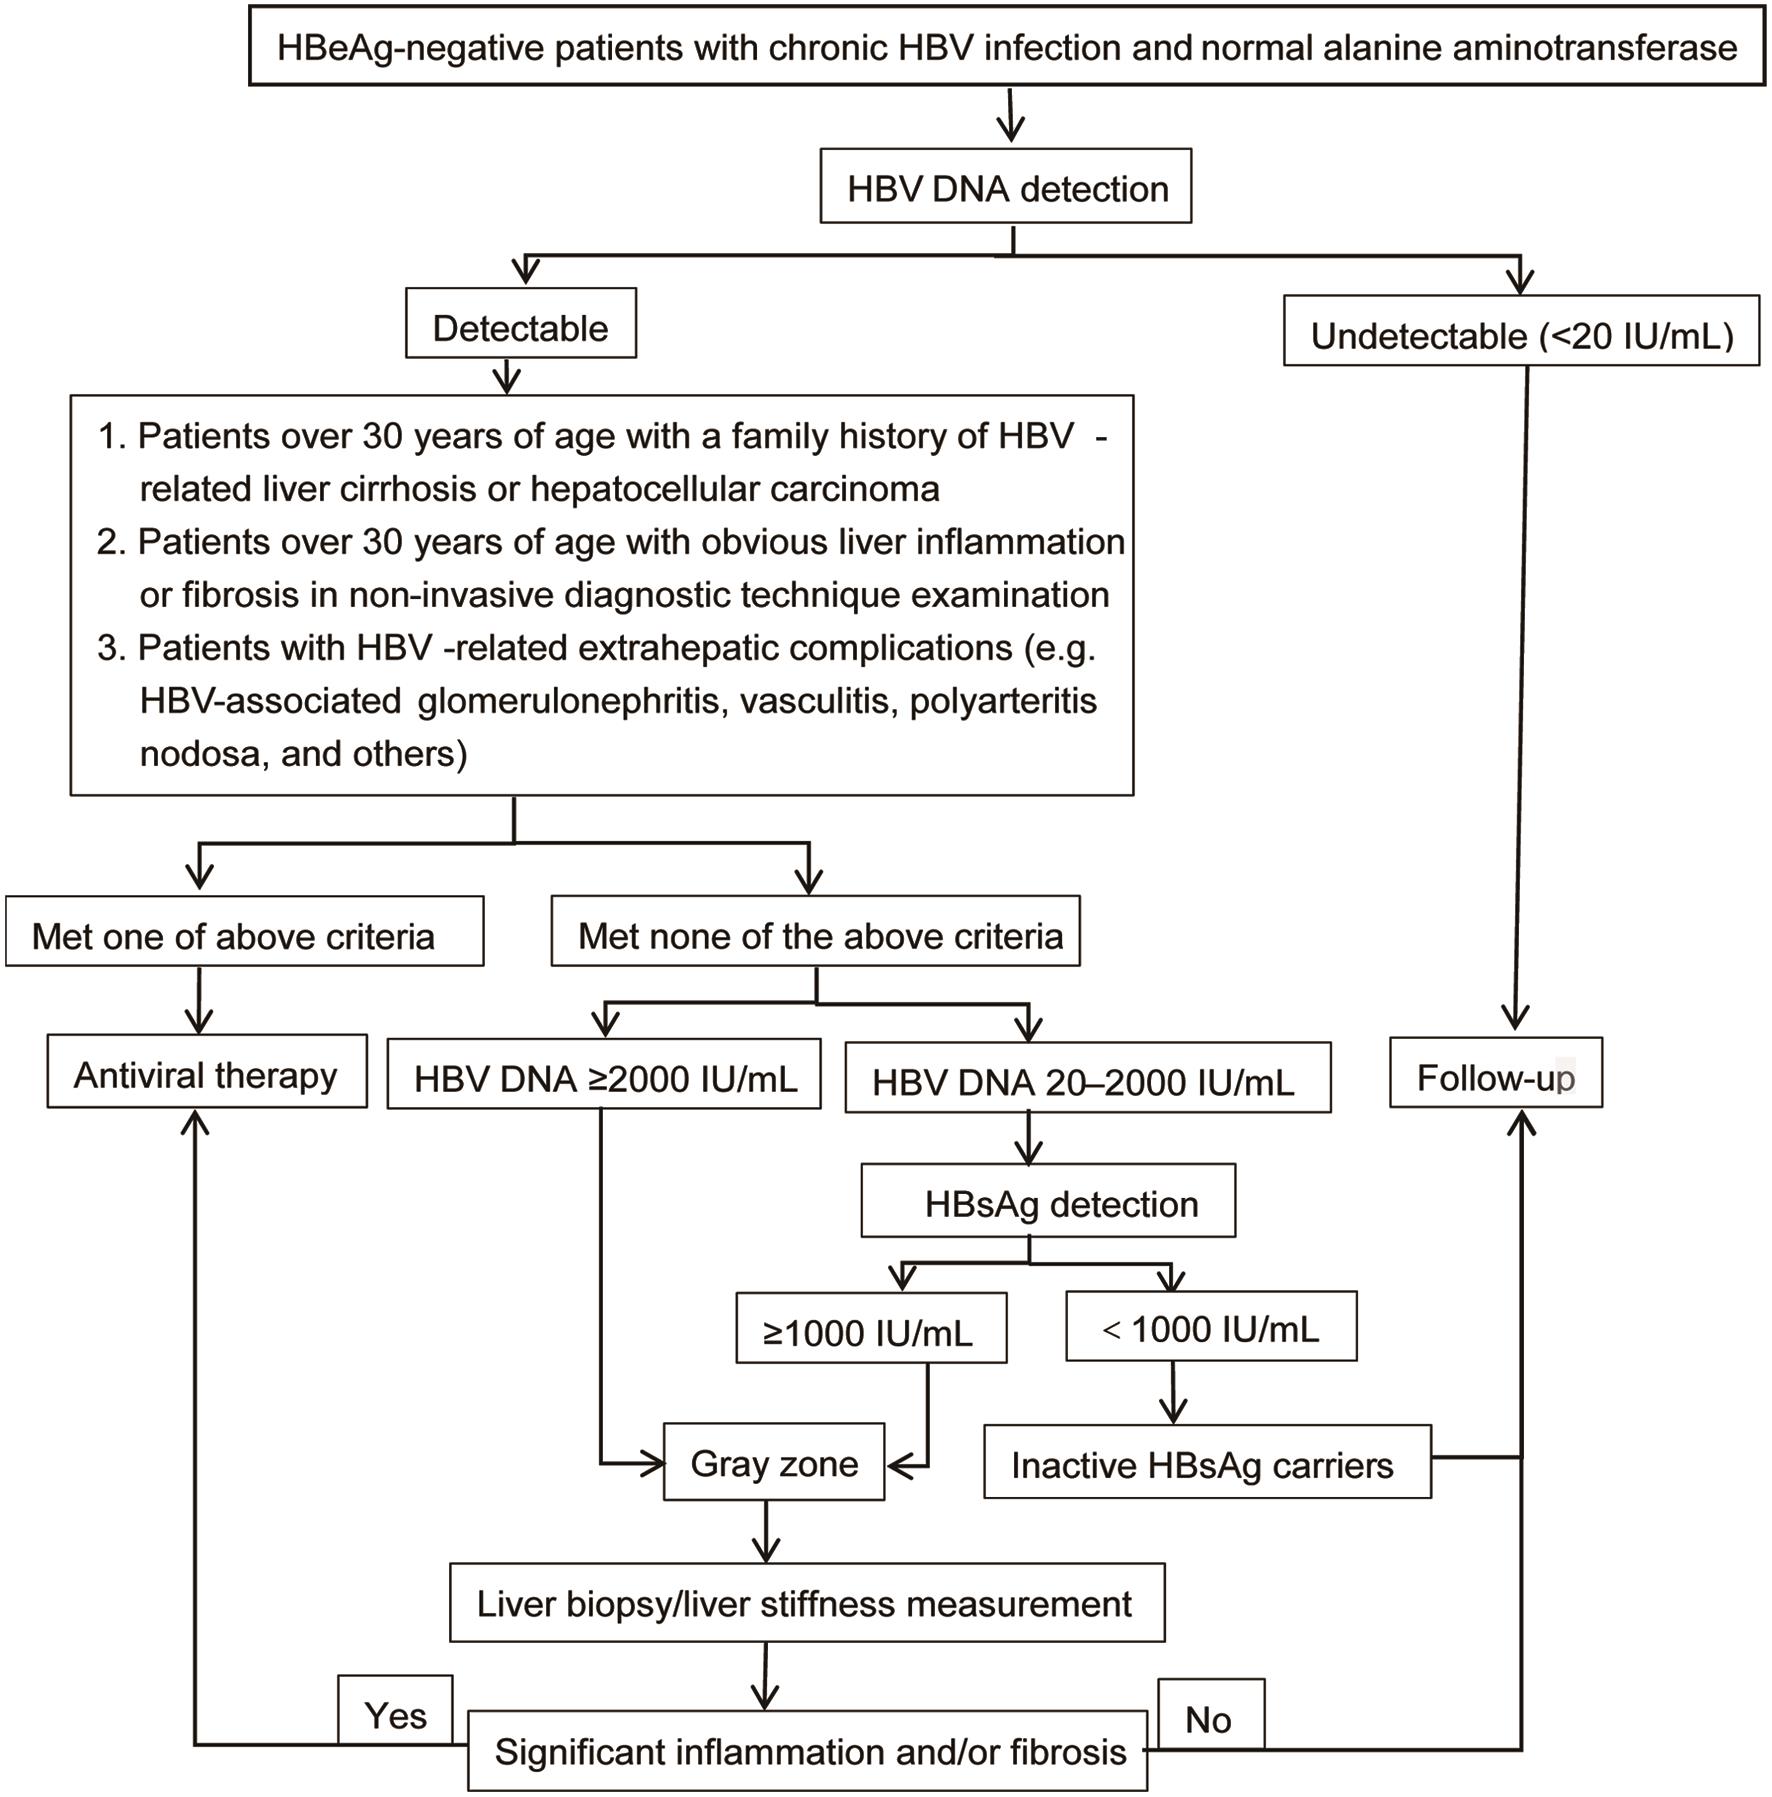 Algorithm for the management of HBeAg-negative patients with chronic HBV infection and normal alanine aminotransferase.